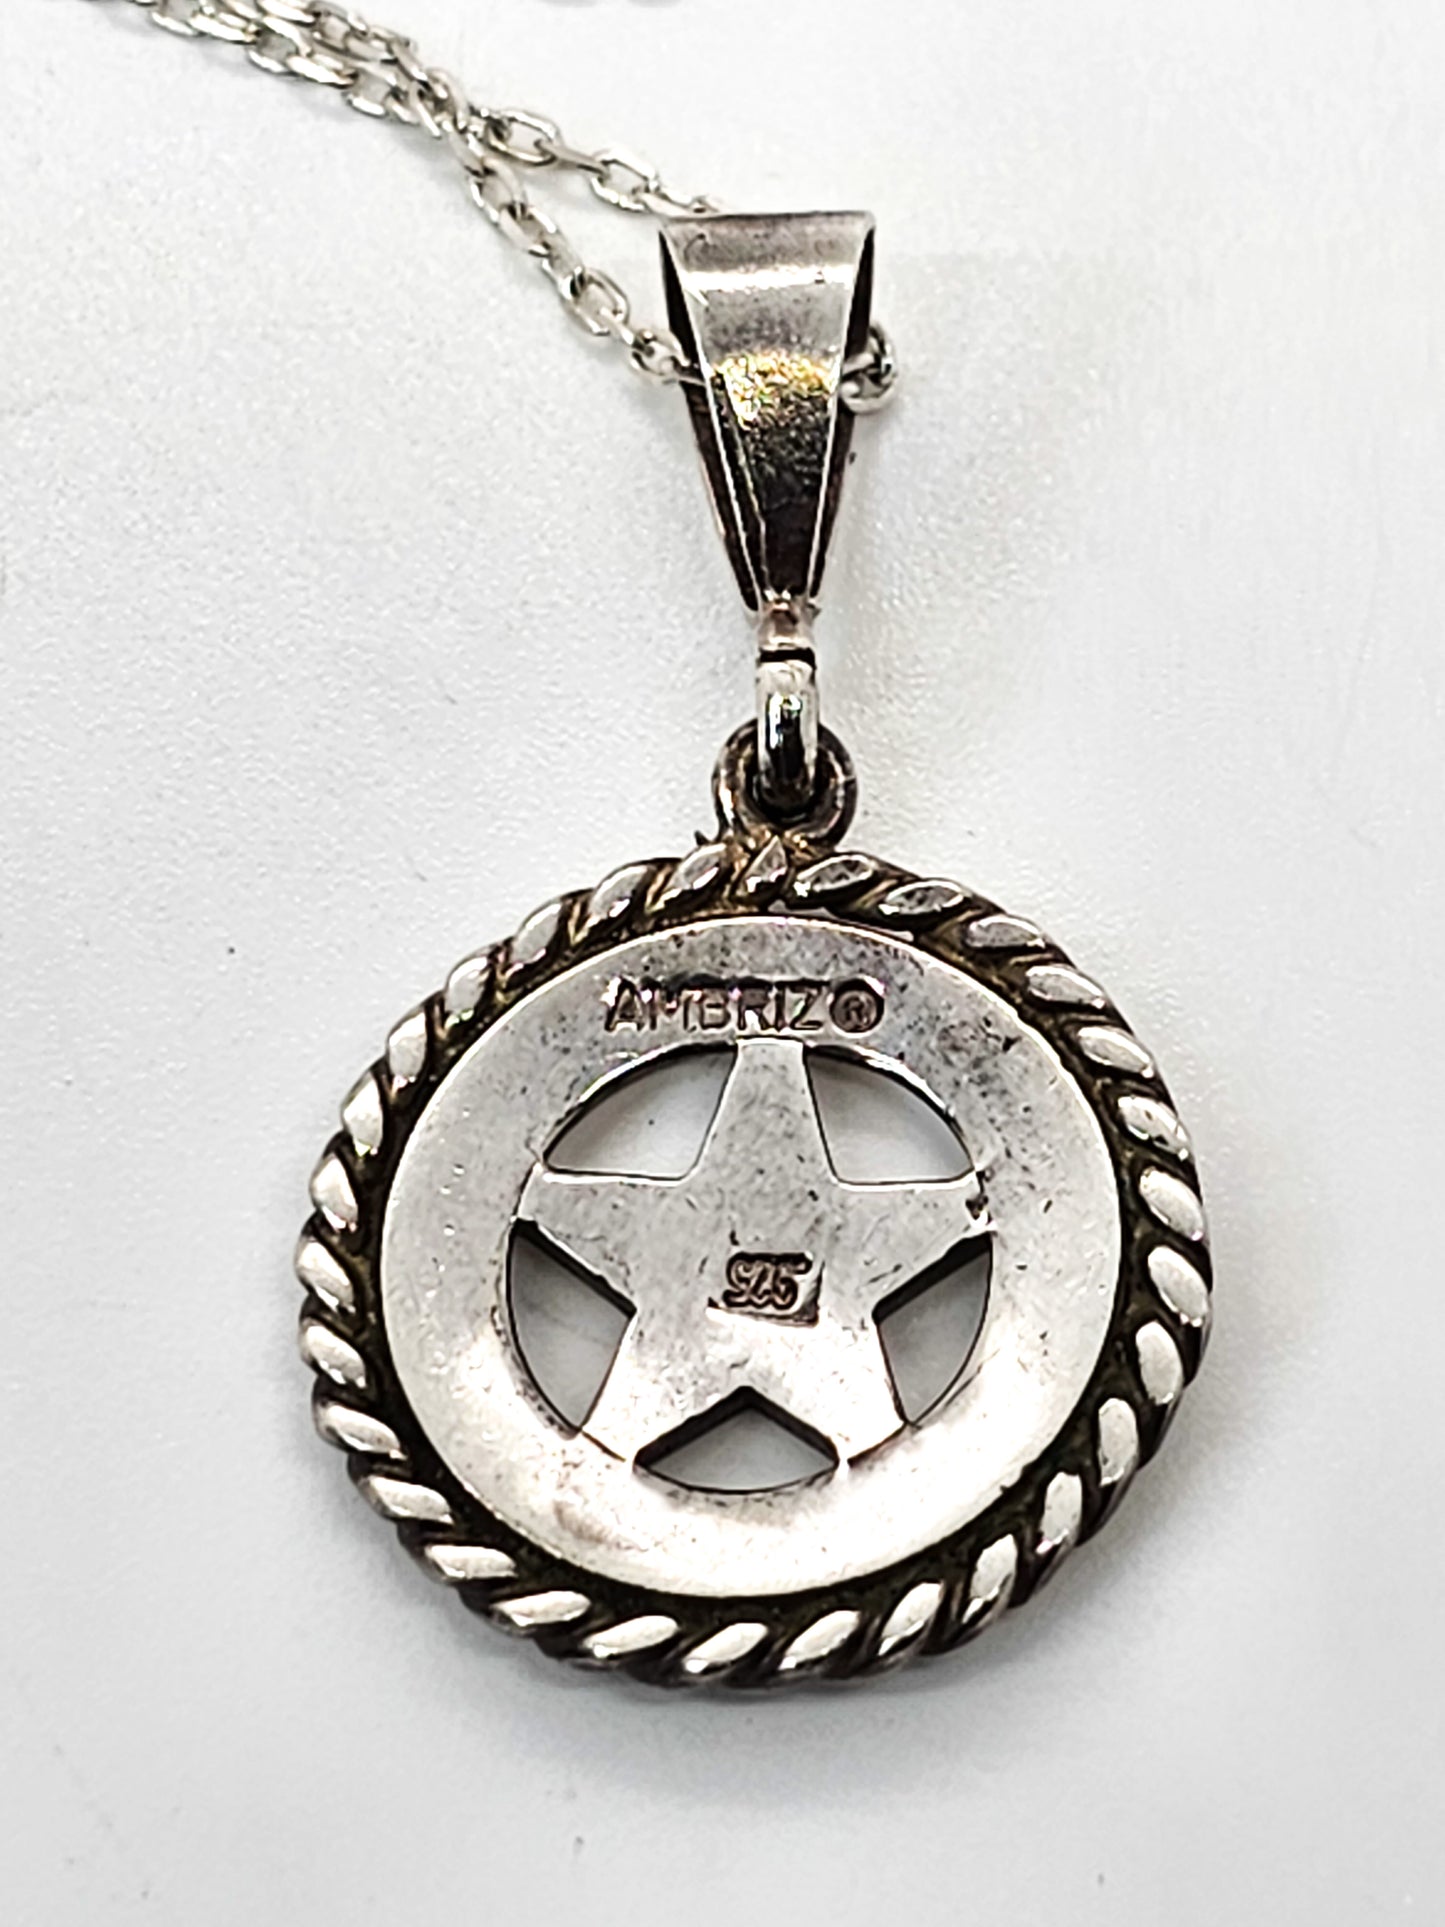 Ambriz Texas star Cinco Peso Pendant with Rope Trim sterling silver necklace